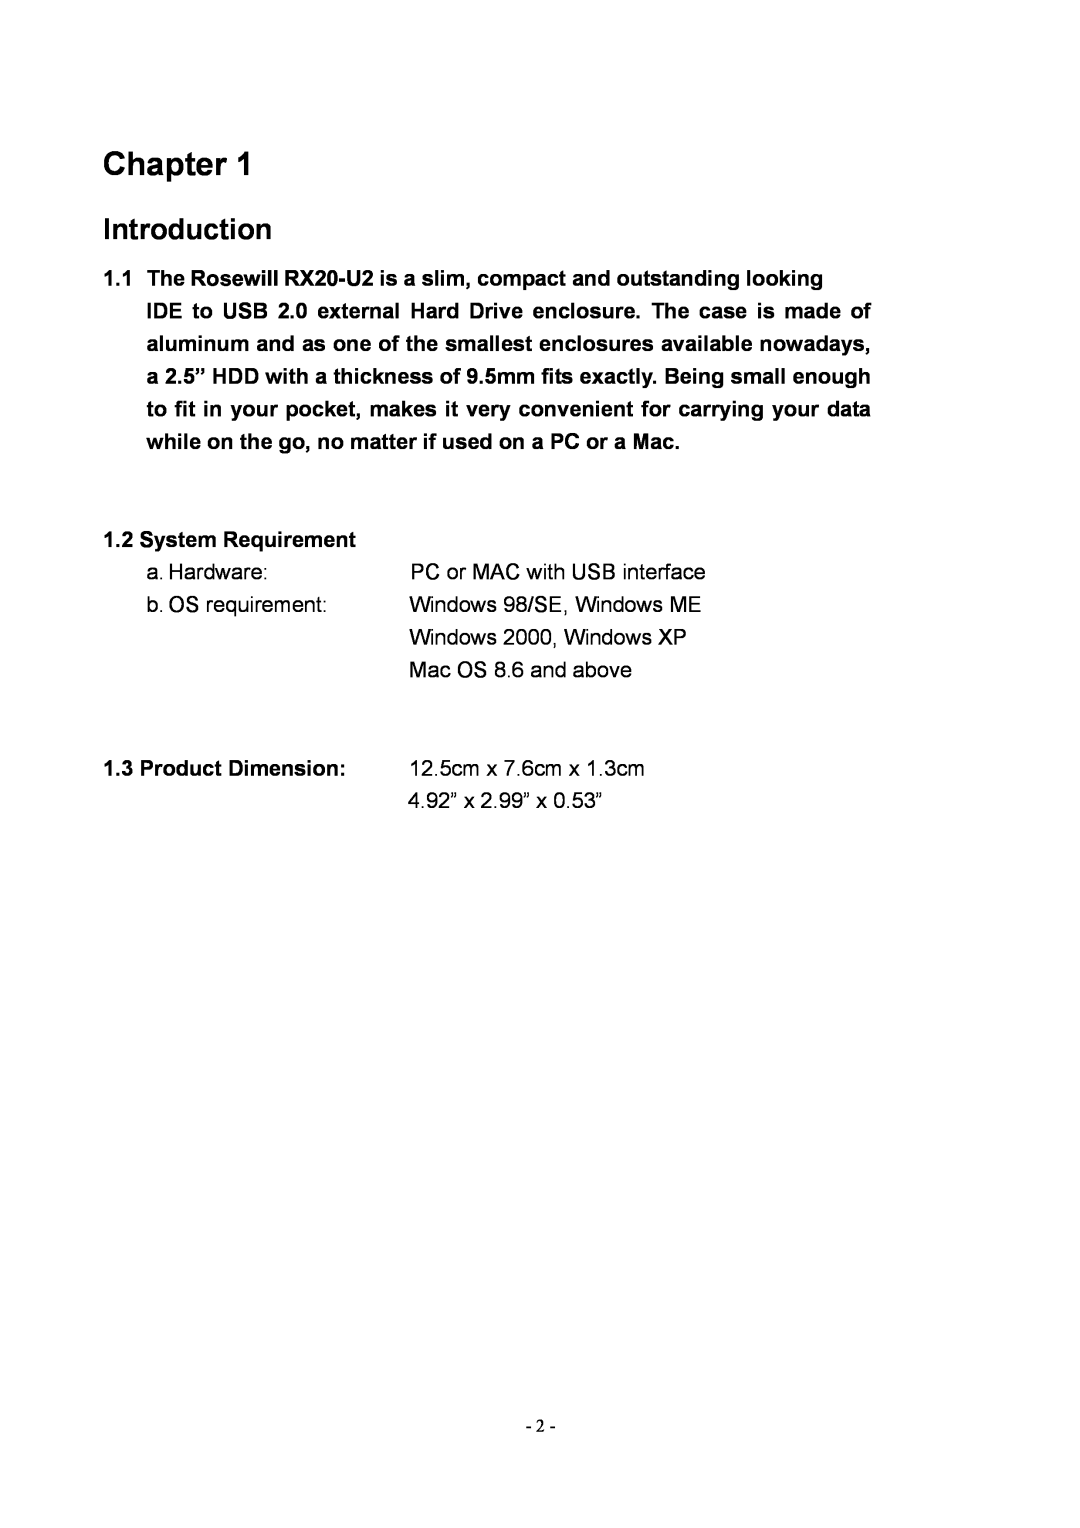 Rosewill RX20-U2 user manual Chapter, Introduction 